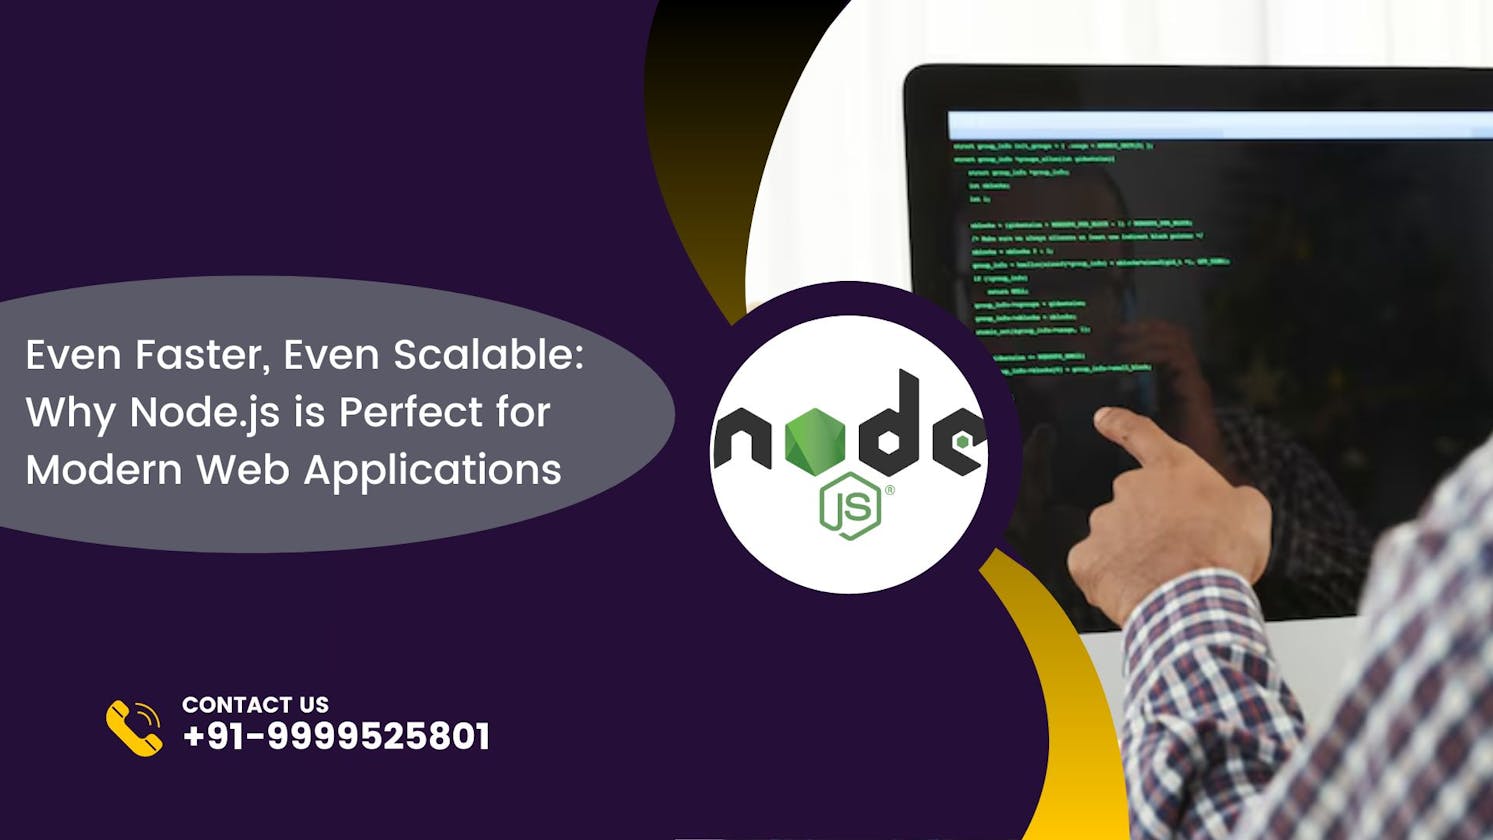 Even Faster, Even Scalable: Why Node.js is Perfect for Modern Web Applications